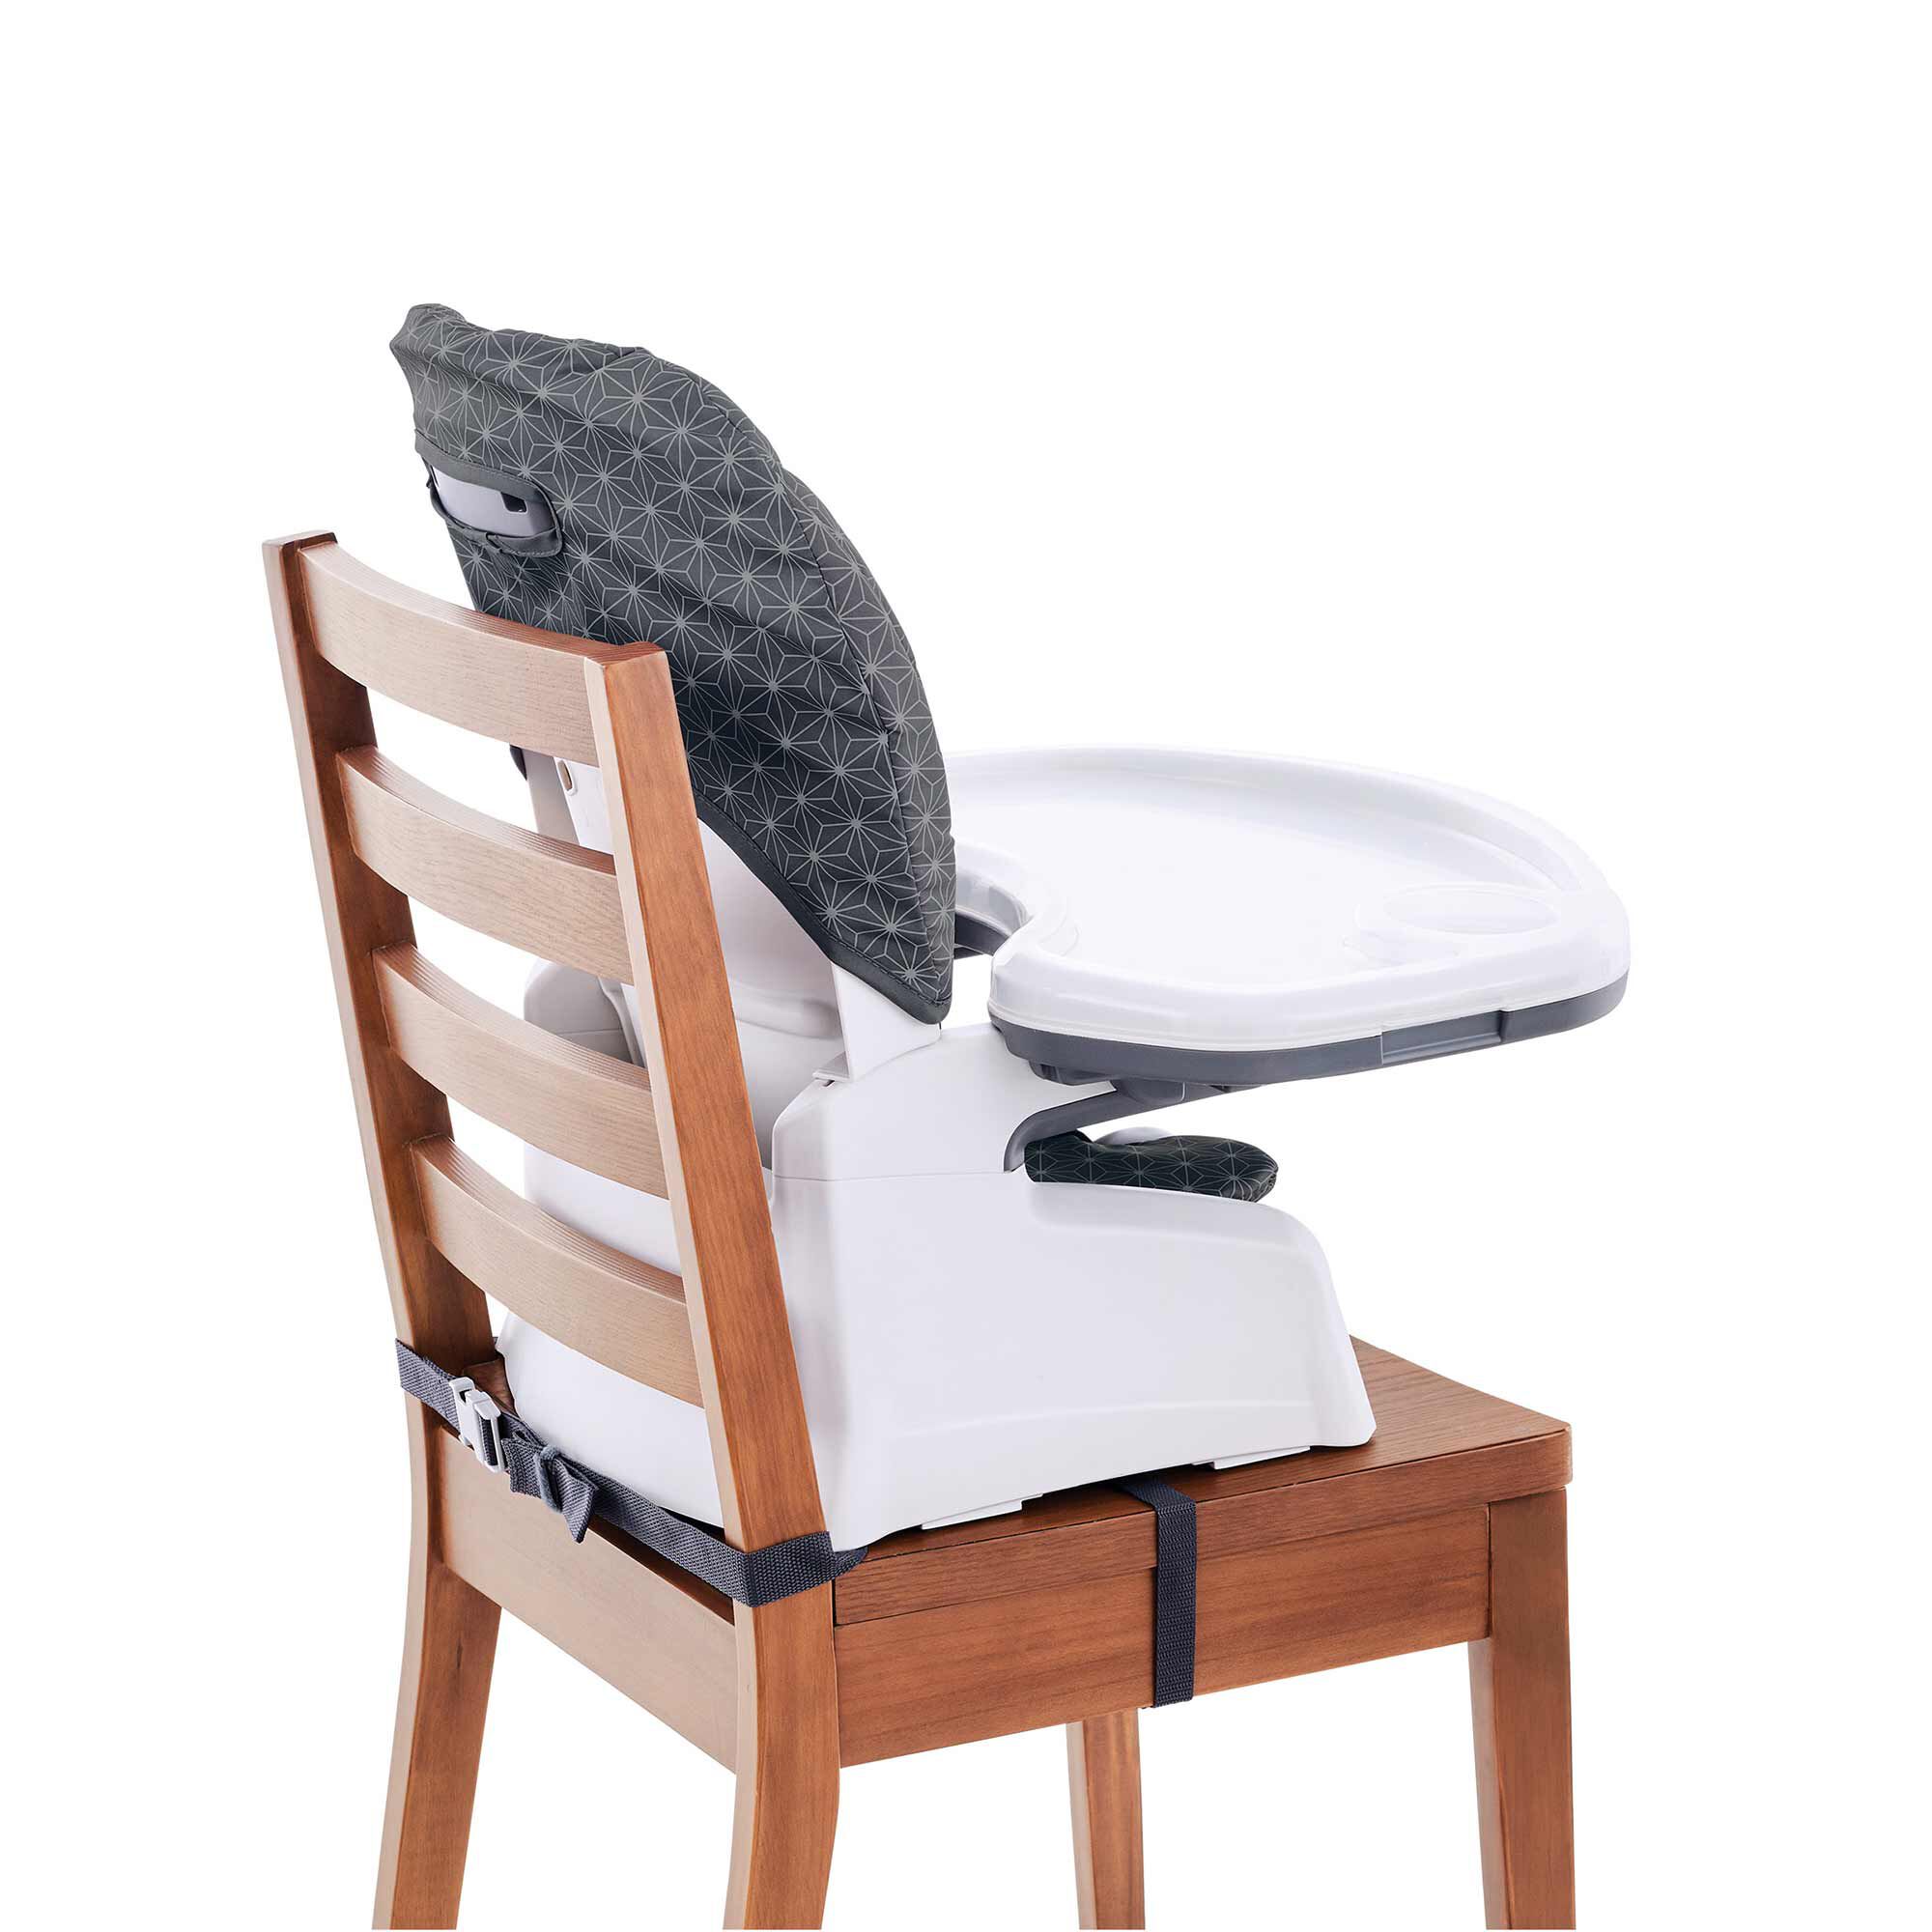 https://www.chiccousa.com/dw/image/v2/AAMT_PRD/on/demandware.static/-/Sites-chicco_catalog/default/dw3ab5f11a/images/products/Gear/snack-booster/chicco-snack-booster-seat-grey-star-3Q-Back.jpg?sw=2000&sh=2000&sm=fit